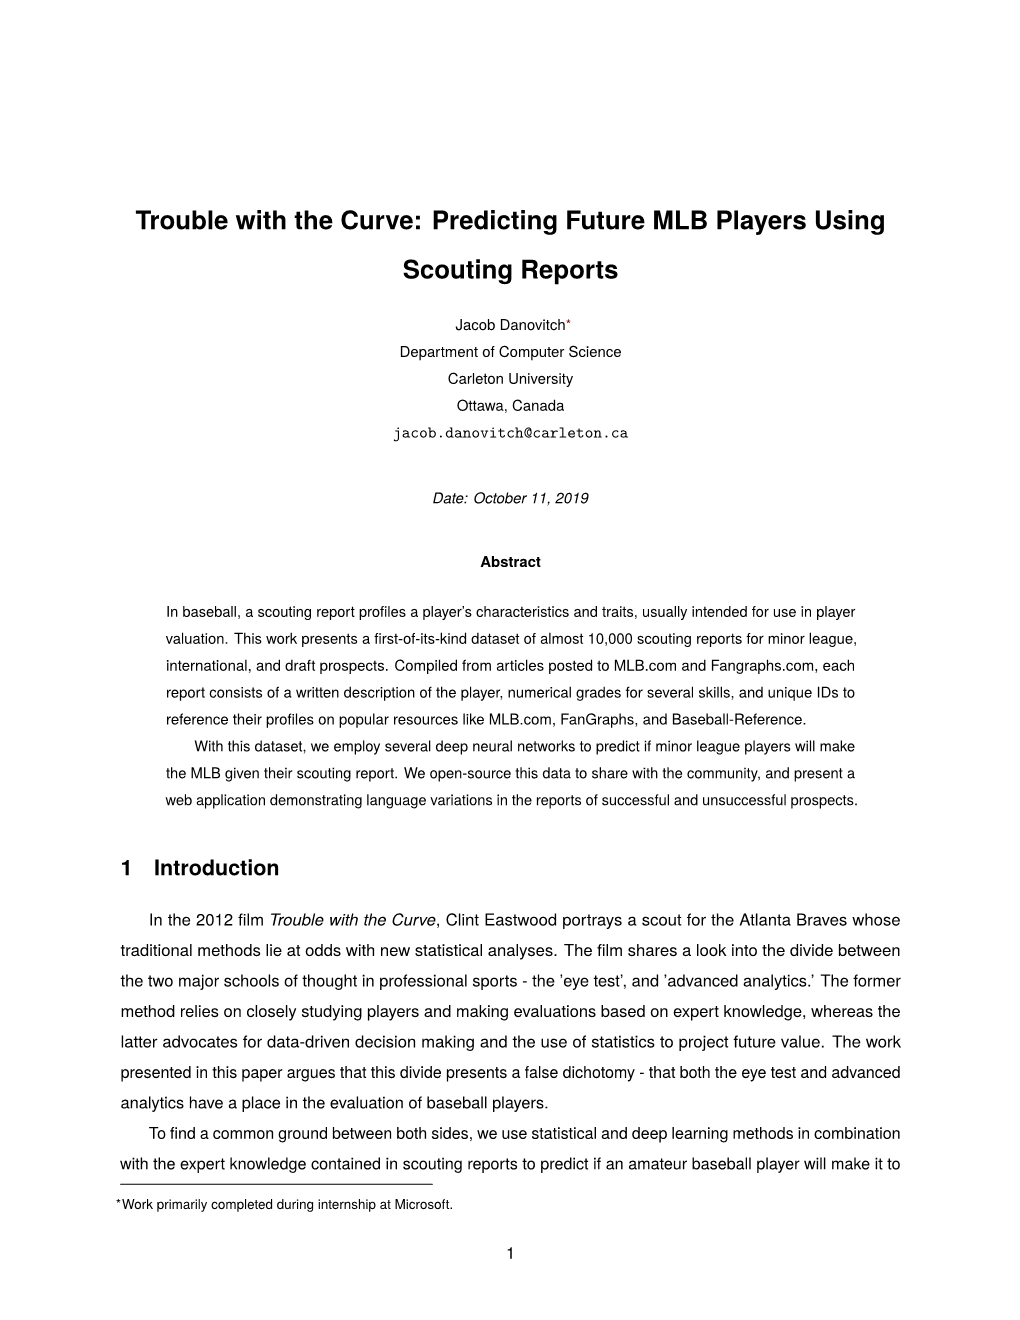 Predicting Future MLB Players Using Scouting Reports